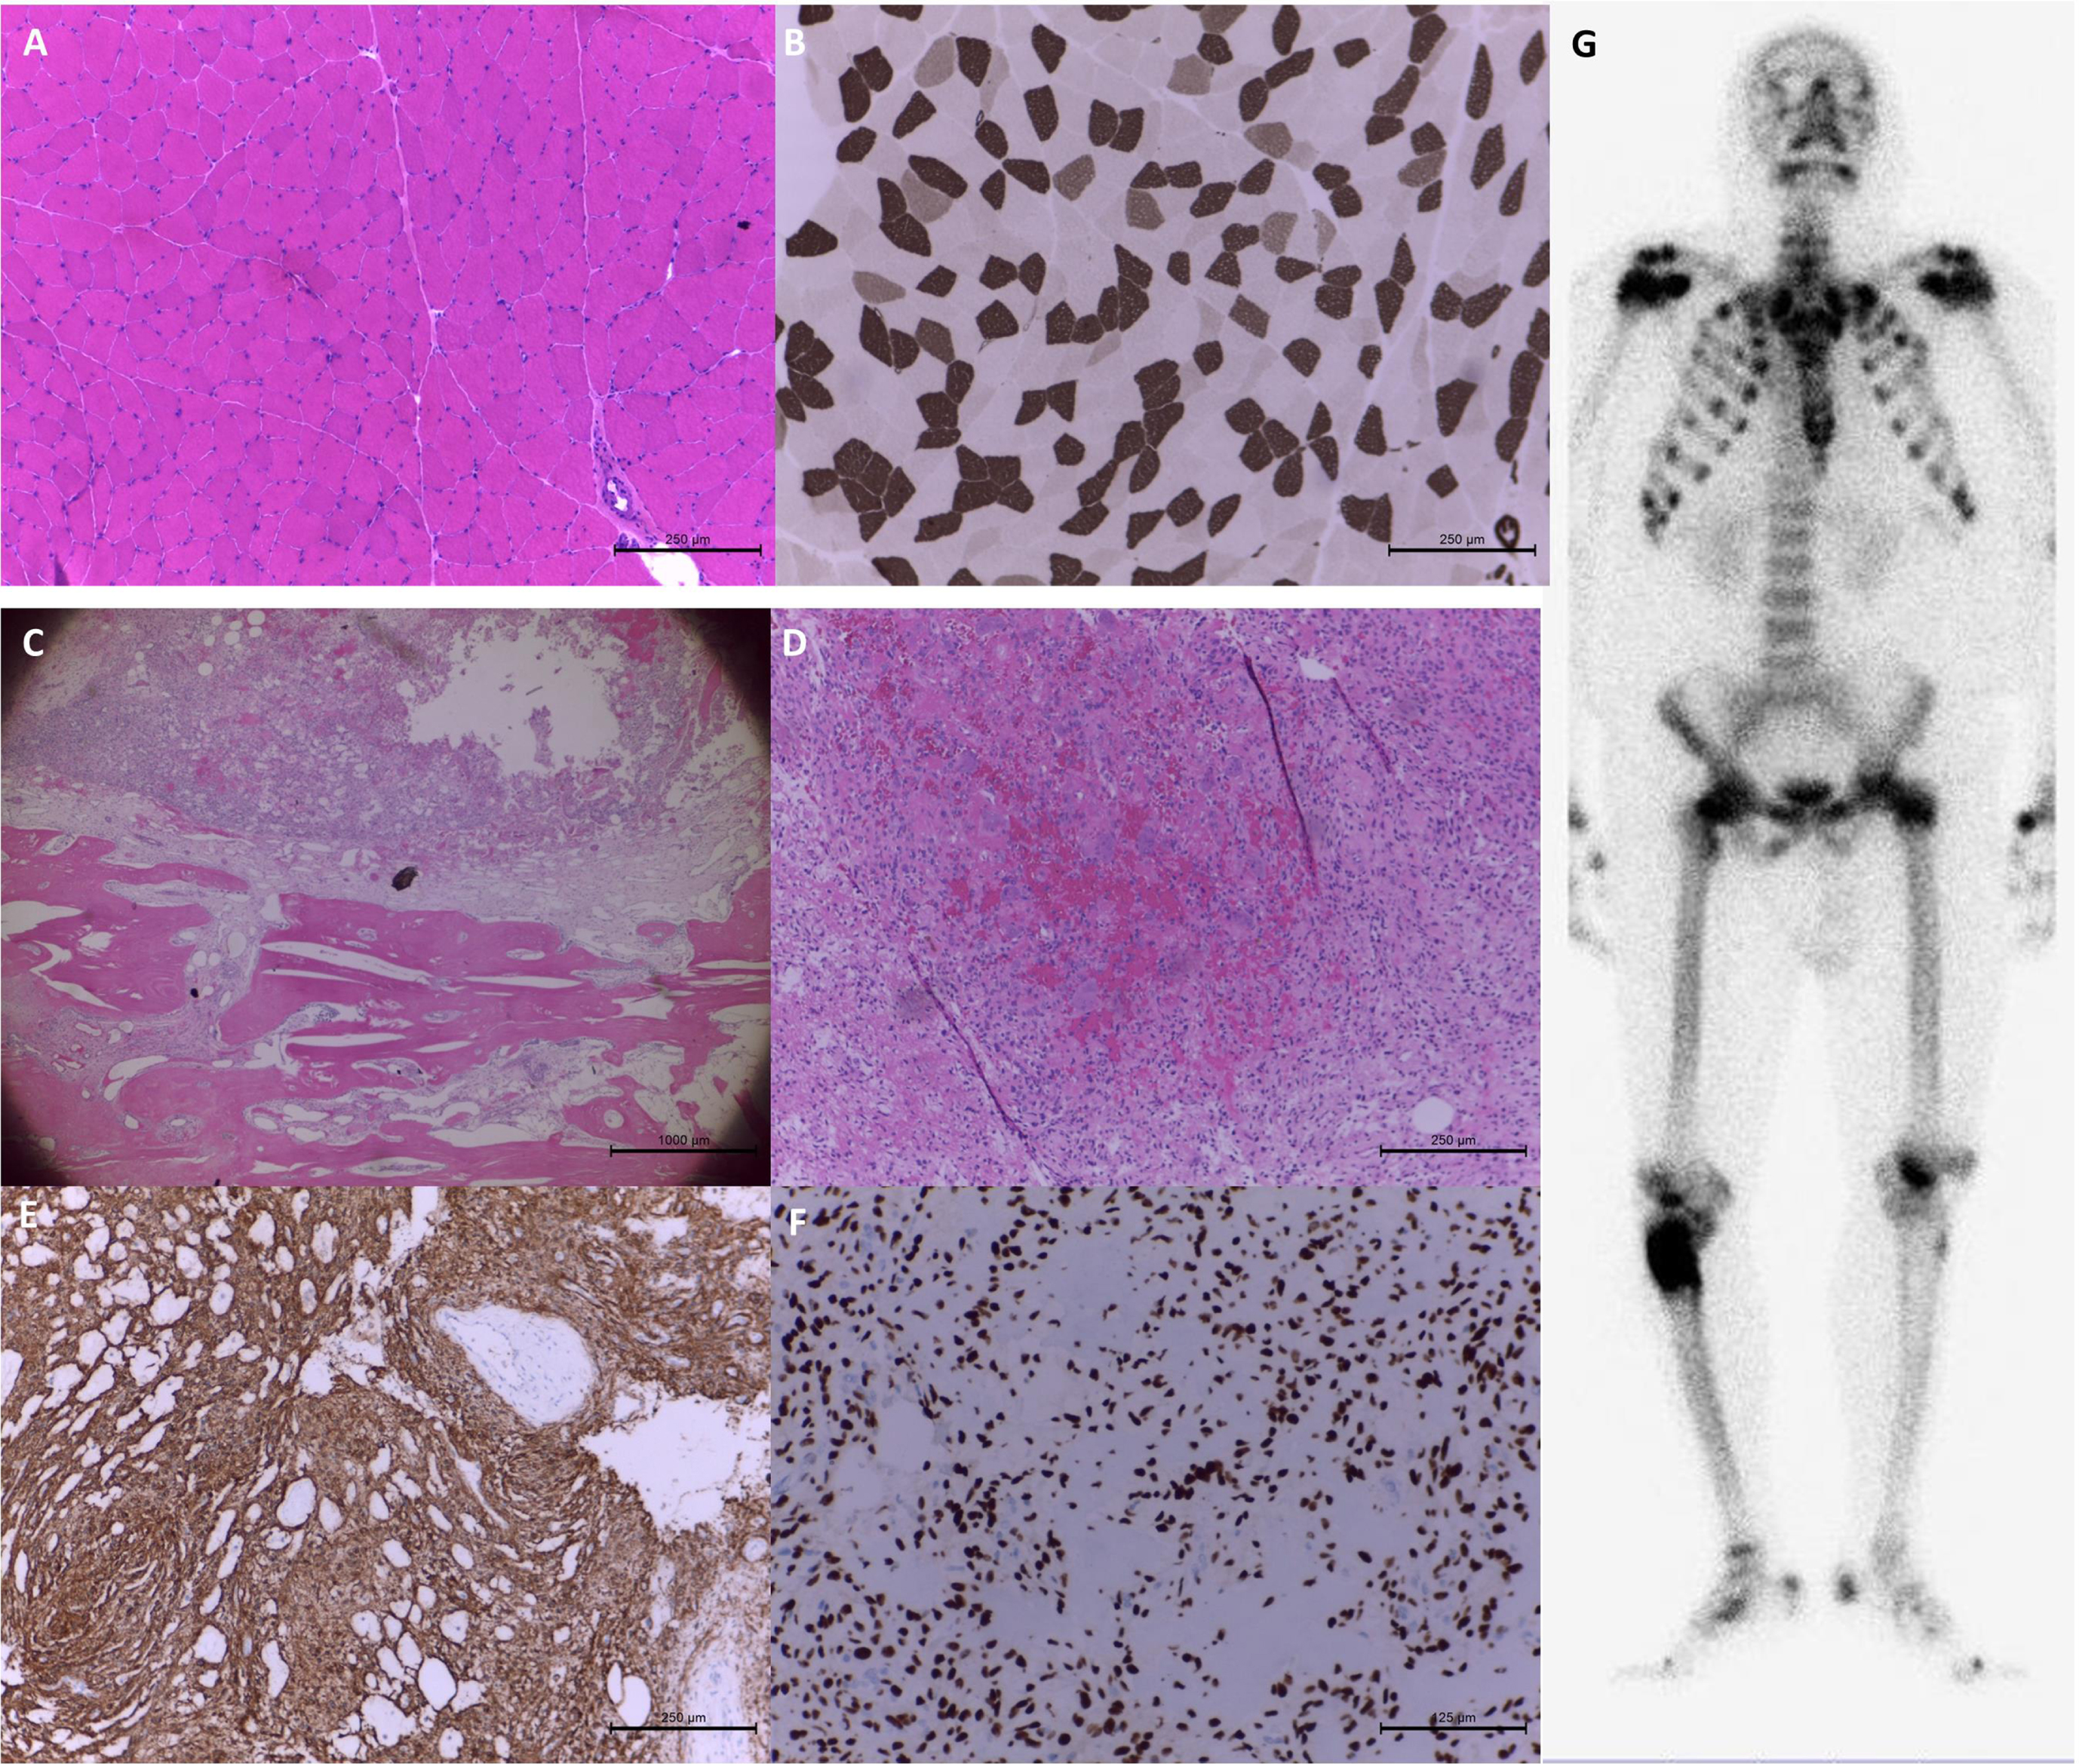 Muscle and bone histopathology in patient 28 with tumor-induced osteomalacia. The staining of hematoxylin and eosin (H&E) (A) and myosin adenosine triphosphatase at pH 4.3 (B) showed compacted muscle fibers with scattered atrophic fibers in the biopsy at left biceps brachii. The bone tumor pathology showed spindle tumor cells in myxohyalinized fibrotic stroma with eosinophilic matrix-like materials accompanying the bony components in H&E staining. (C&D) Focal bony destruction, woven bone formation and grungy calcification were also noted. The immunohistochemical staining of CD56 (E) and SATB2 (F) was strongly positive. Whole-body bone scintigraphy revealed a bone tumor with markedly increased osteoblastic activity at the right proximal femur. (G) Additionally, there were multiple posttraumatic changes in the thoracic cage, pubic bones, and bilateral femurs.